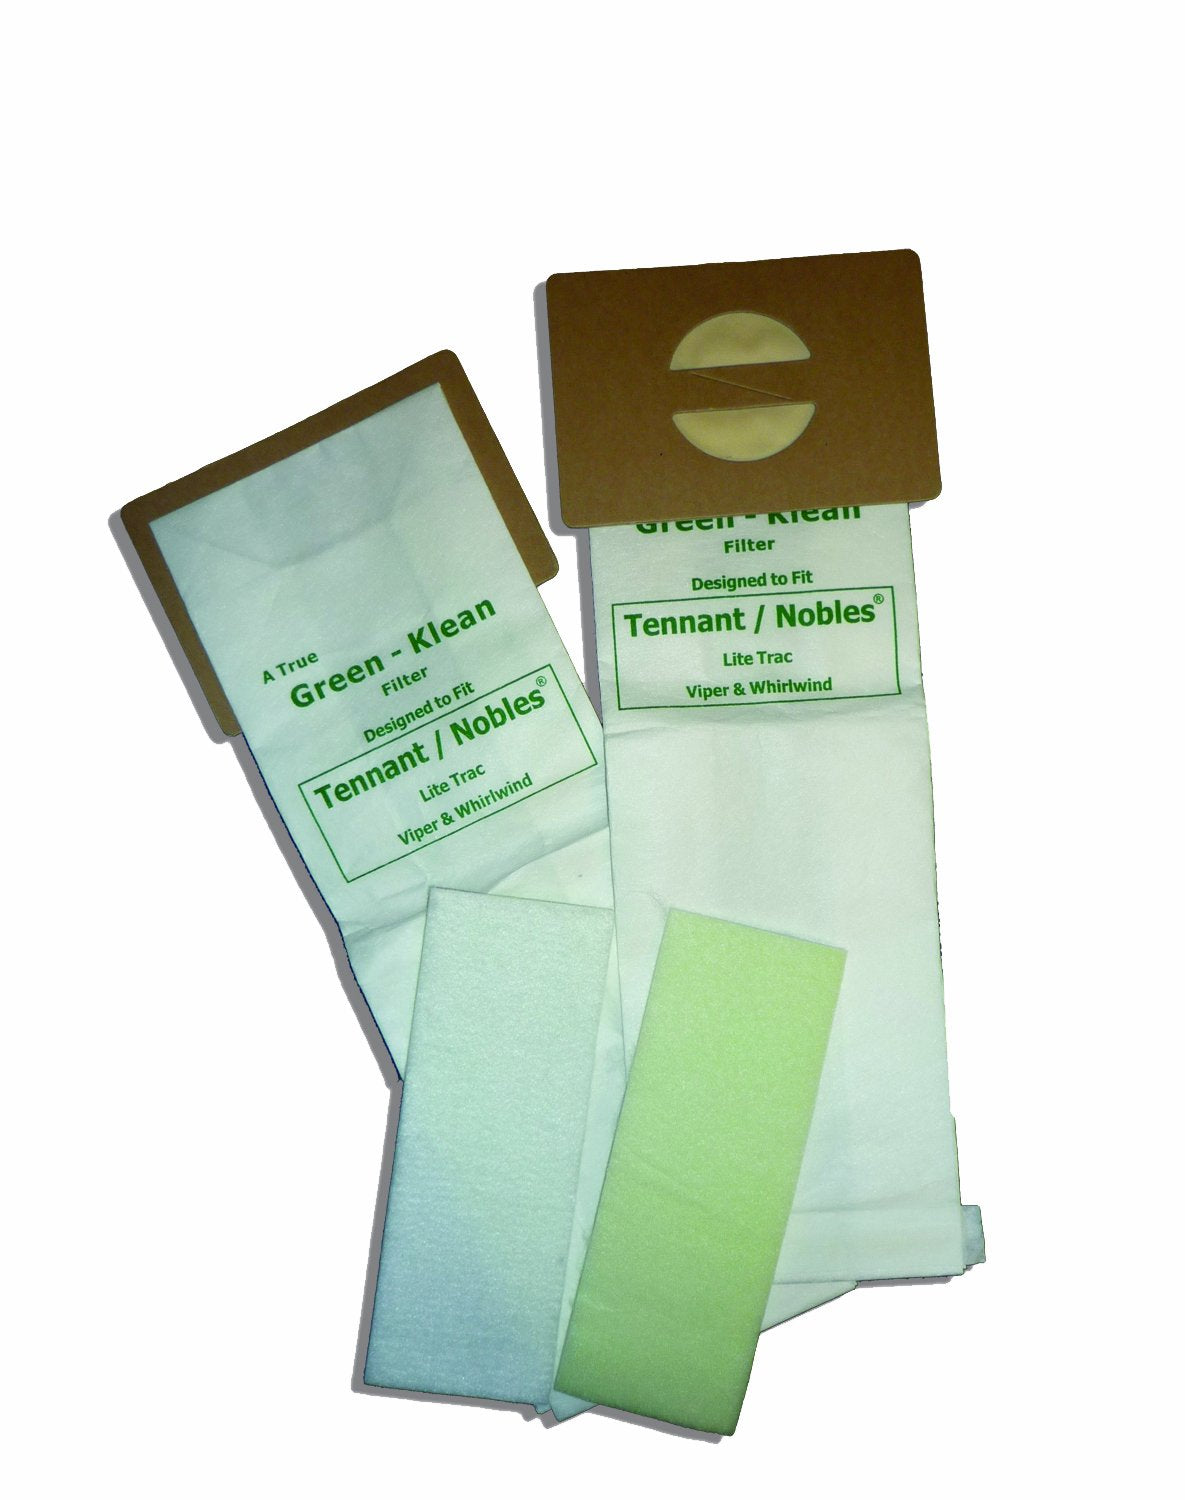 Green Klean GK-LitTrac Tennant/Nobles LiteTrac, Viper and Whirlwind Replacement Vacuum Bags (Pack of 100)